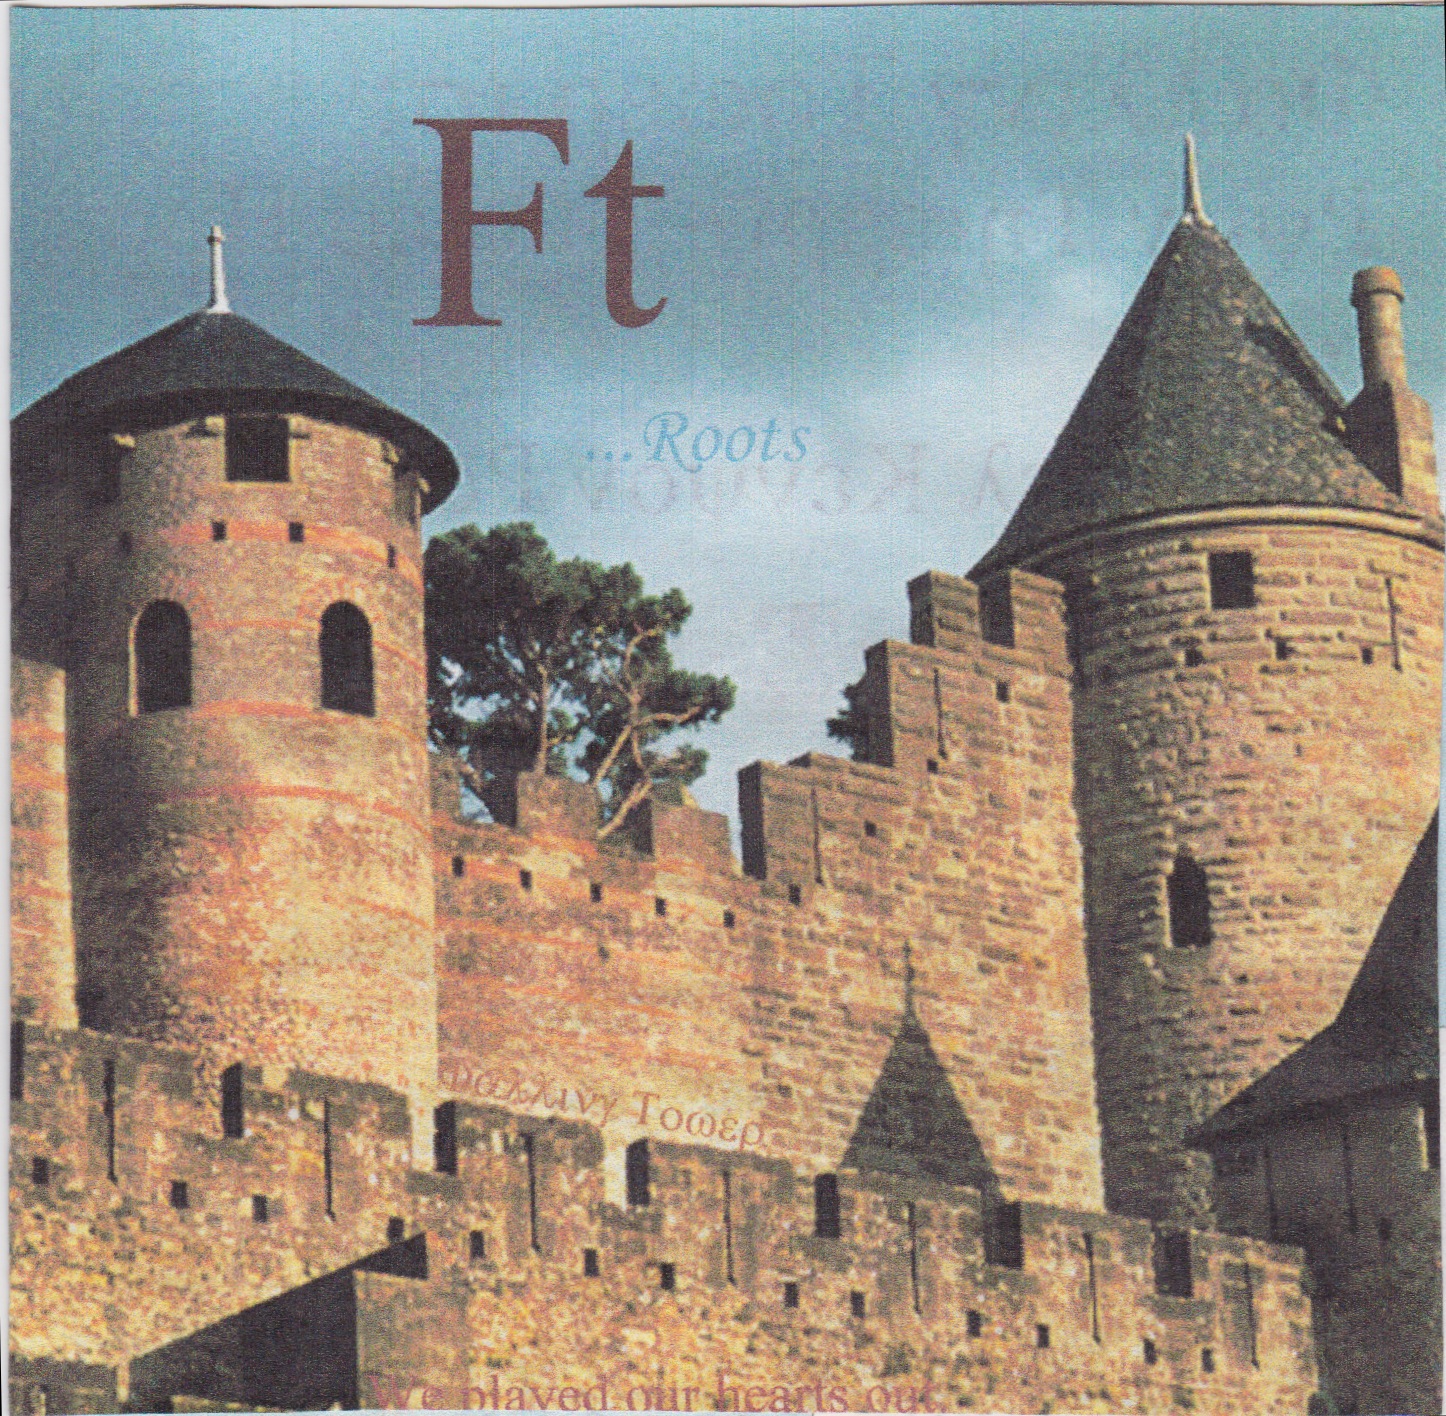 FT Roots Album Cover of a medieval castle